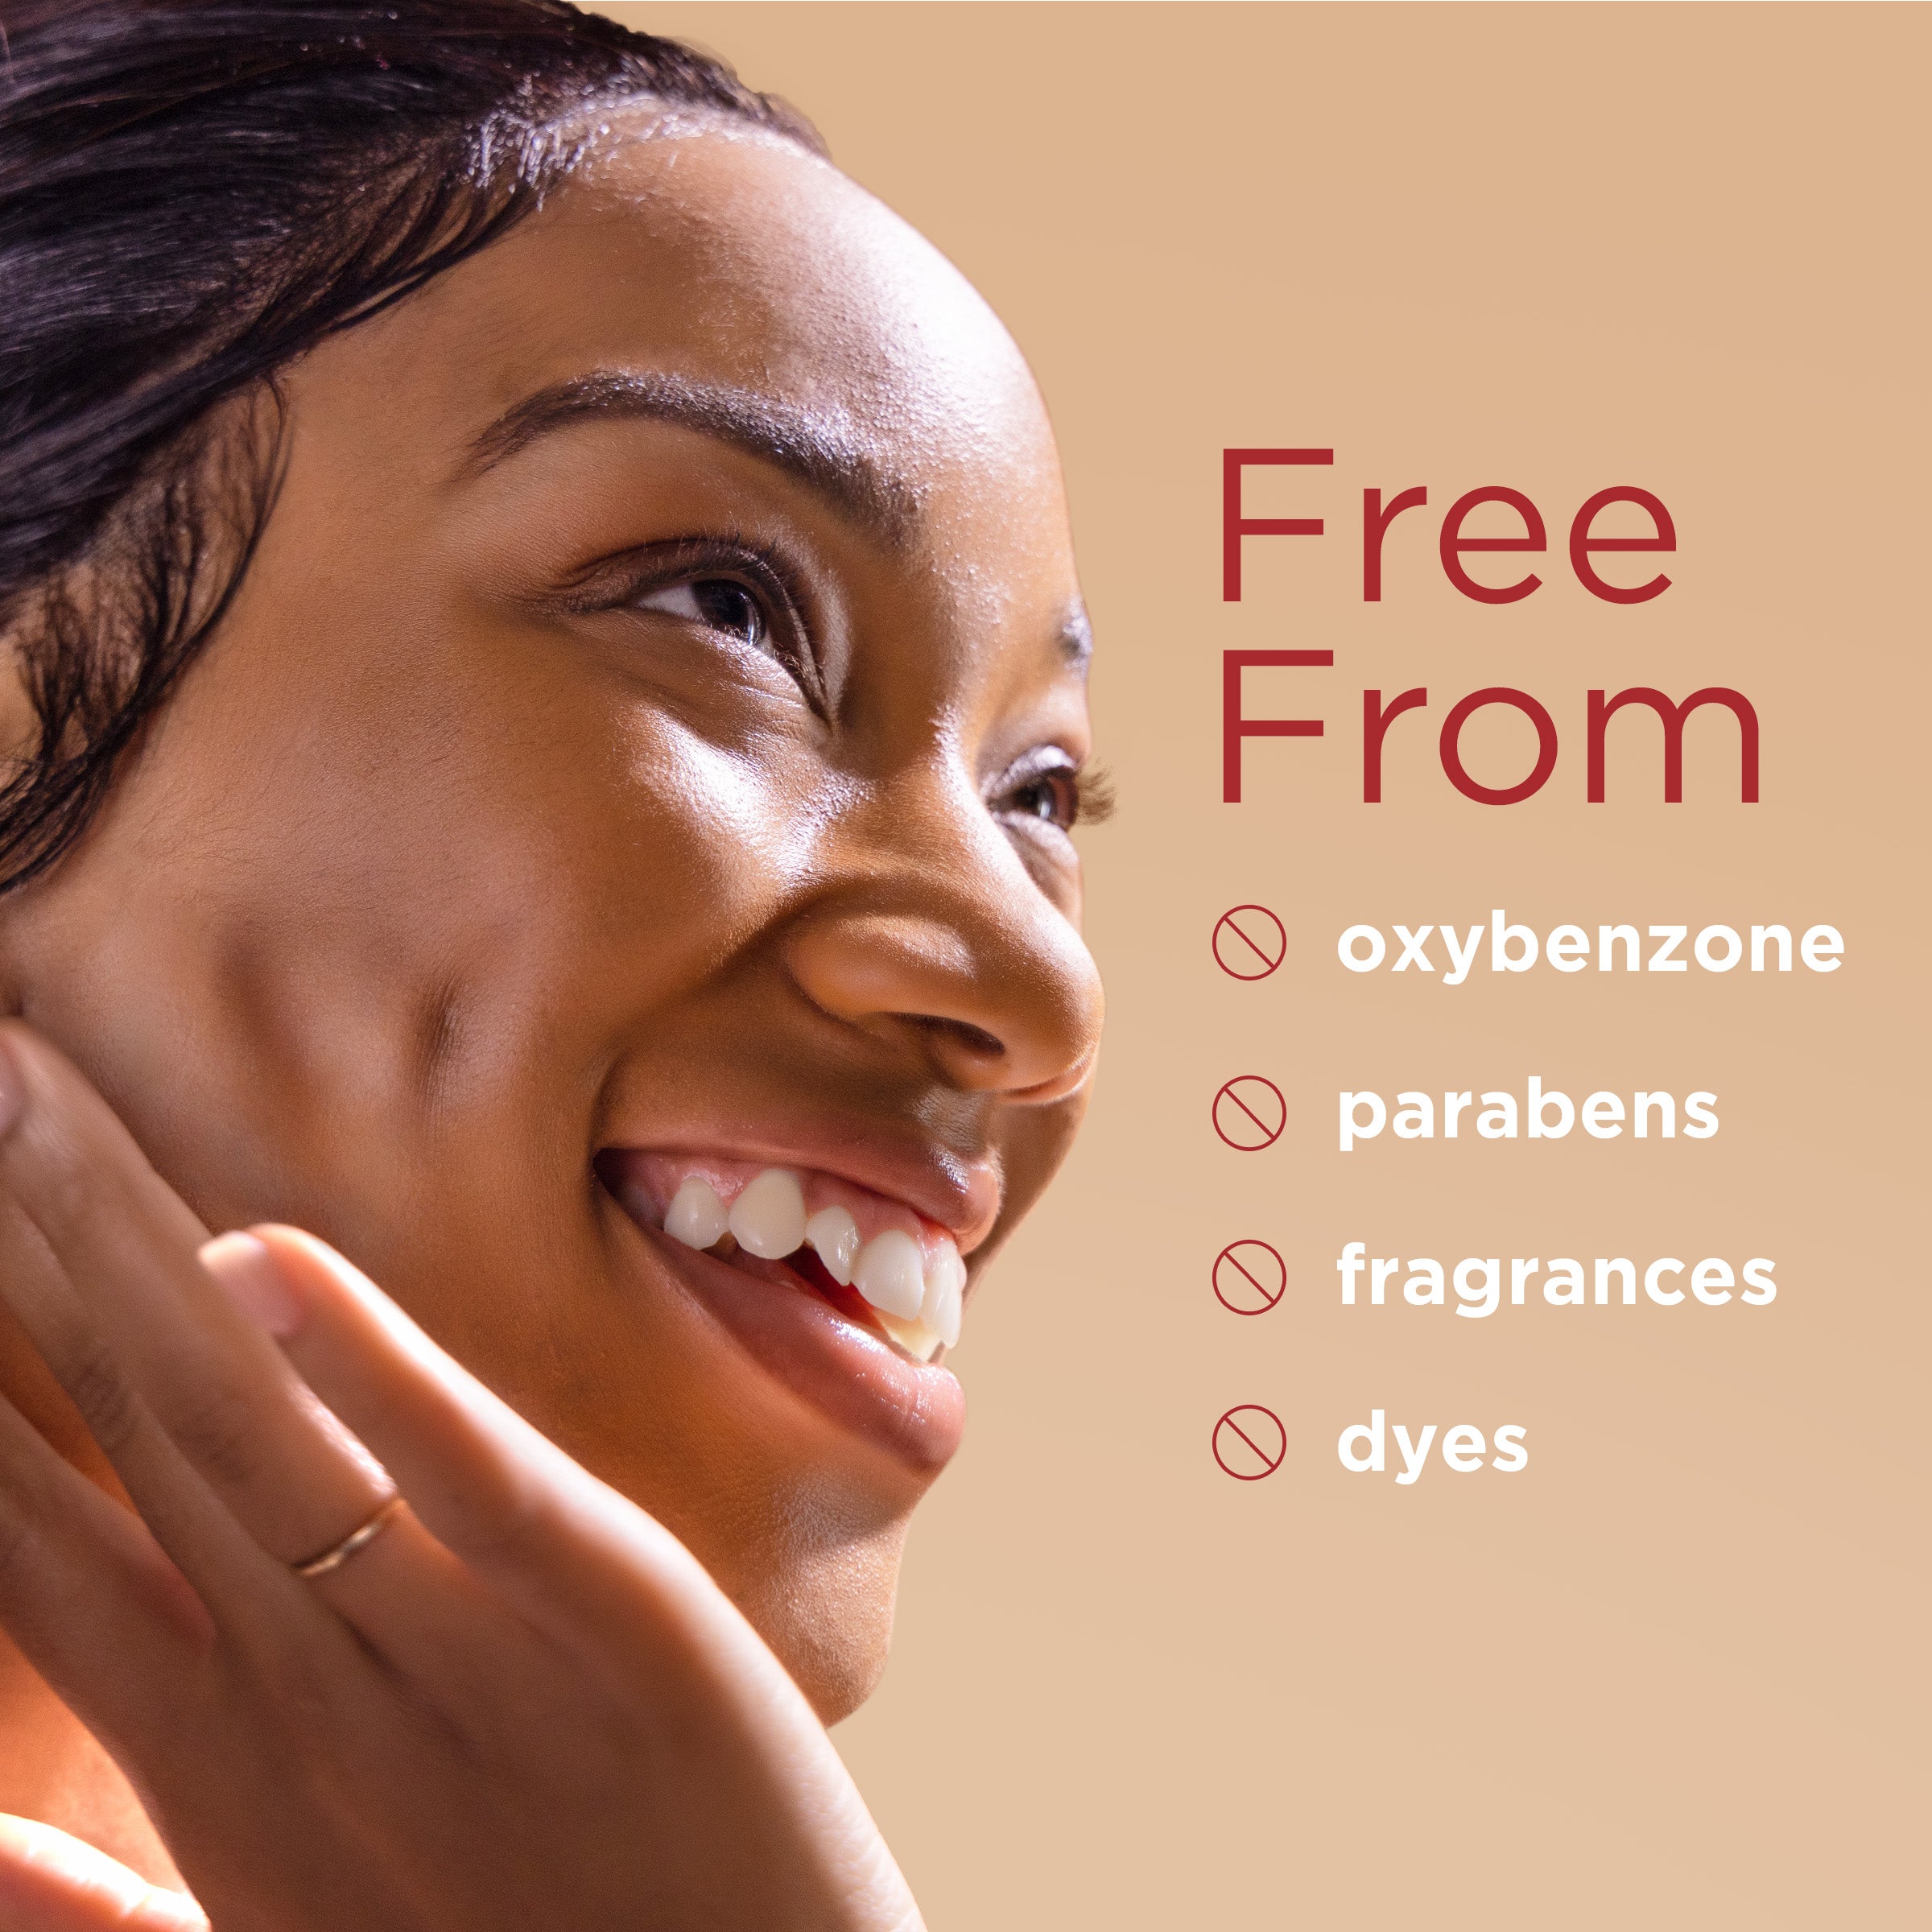 Free from oxybenzone, parabens, fragrances, dyes